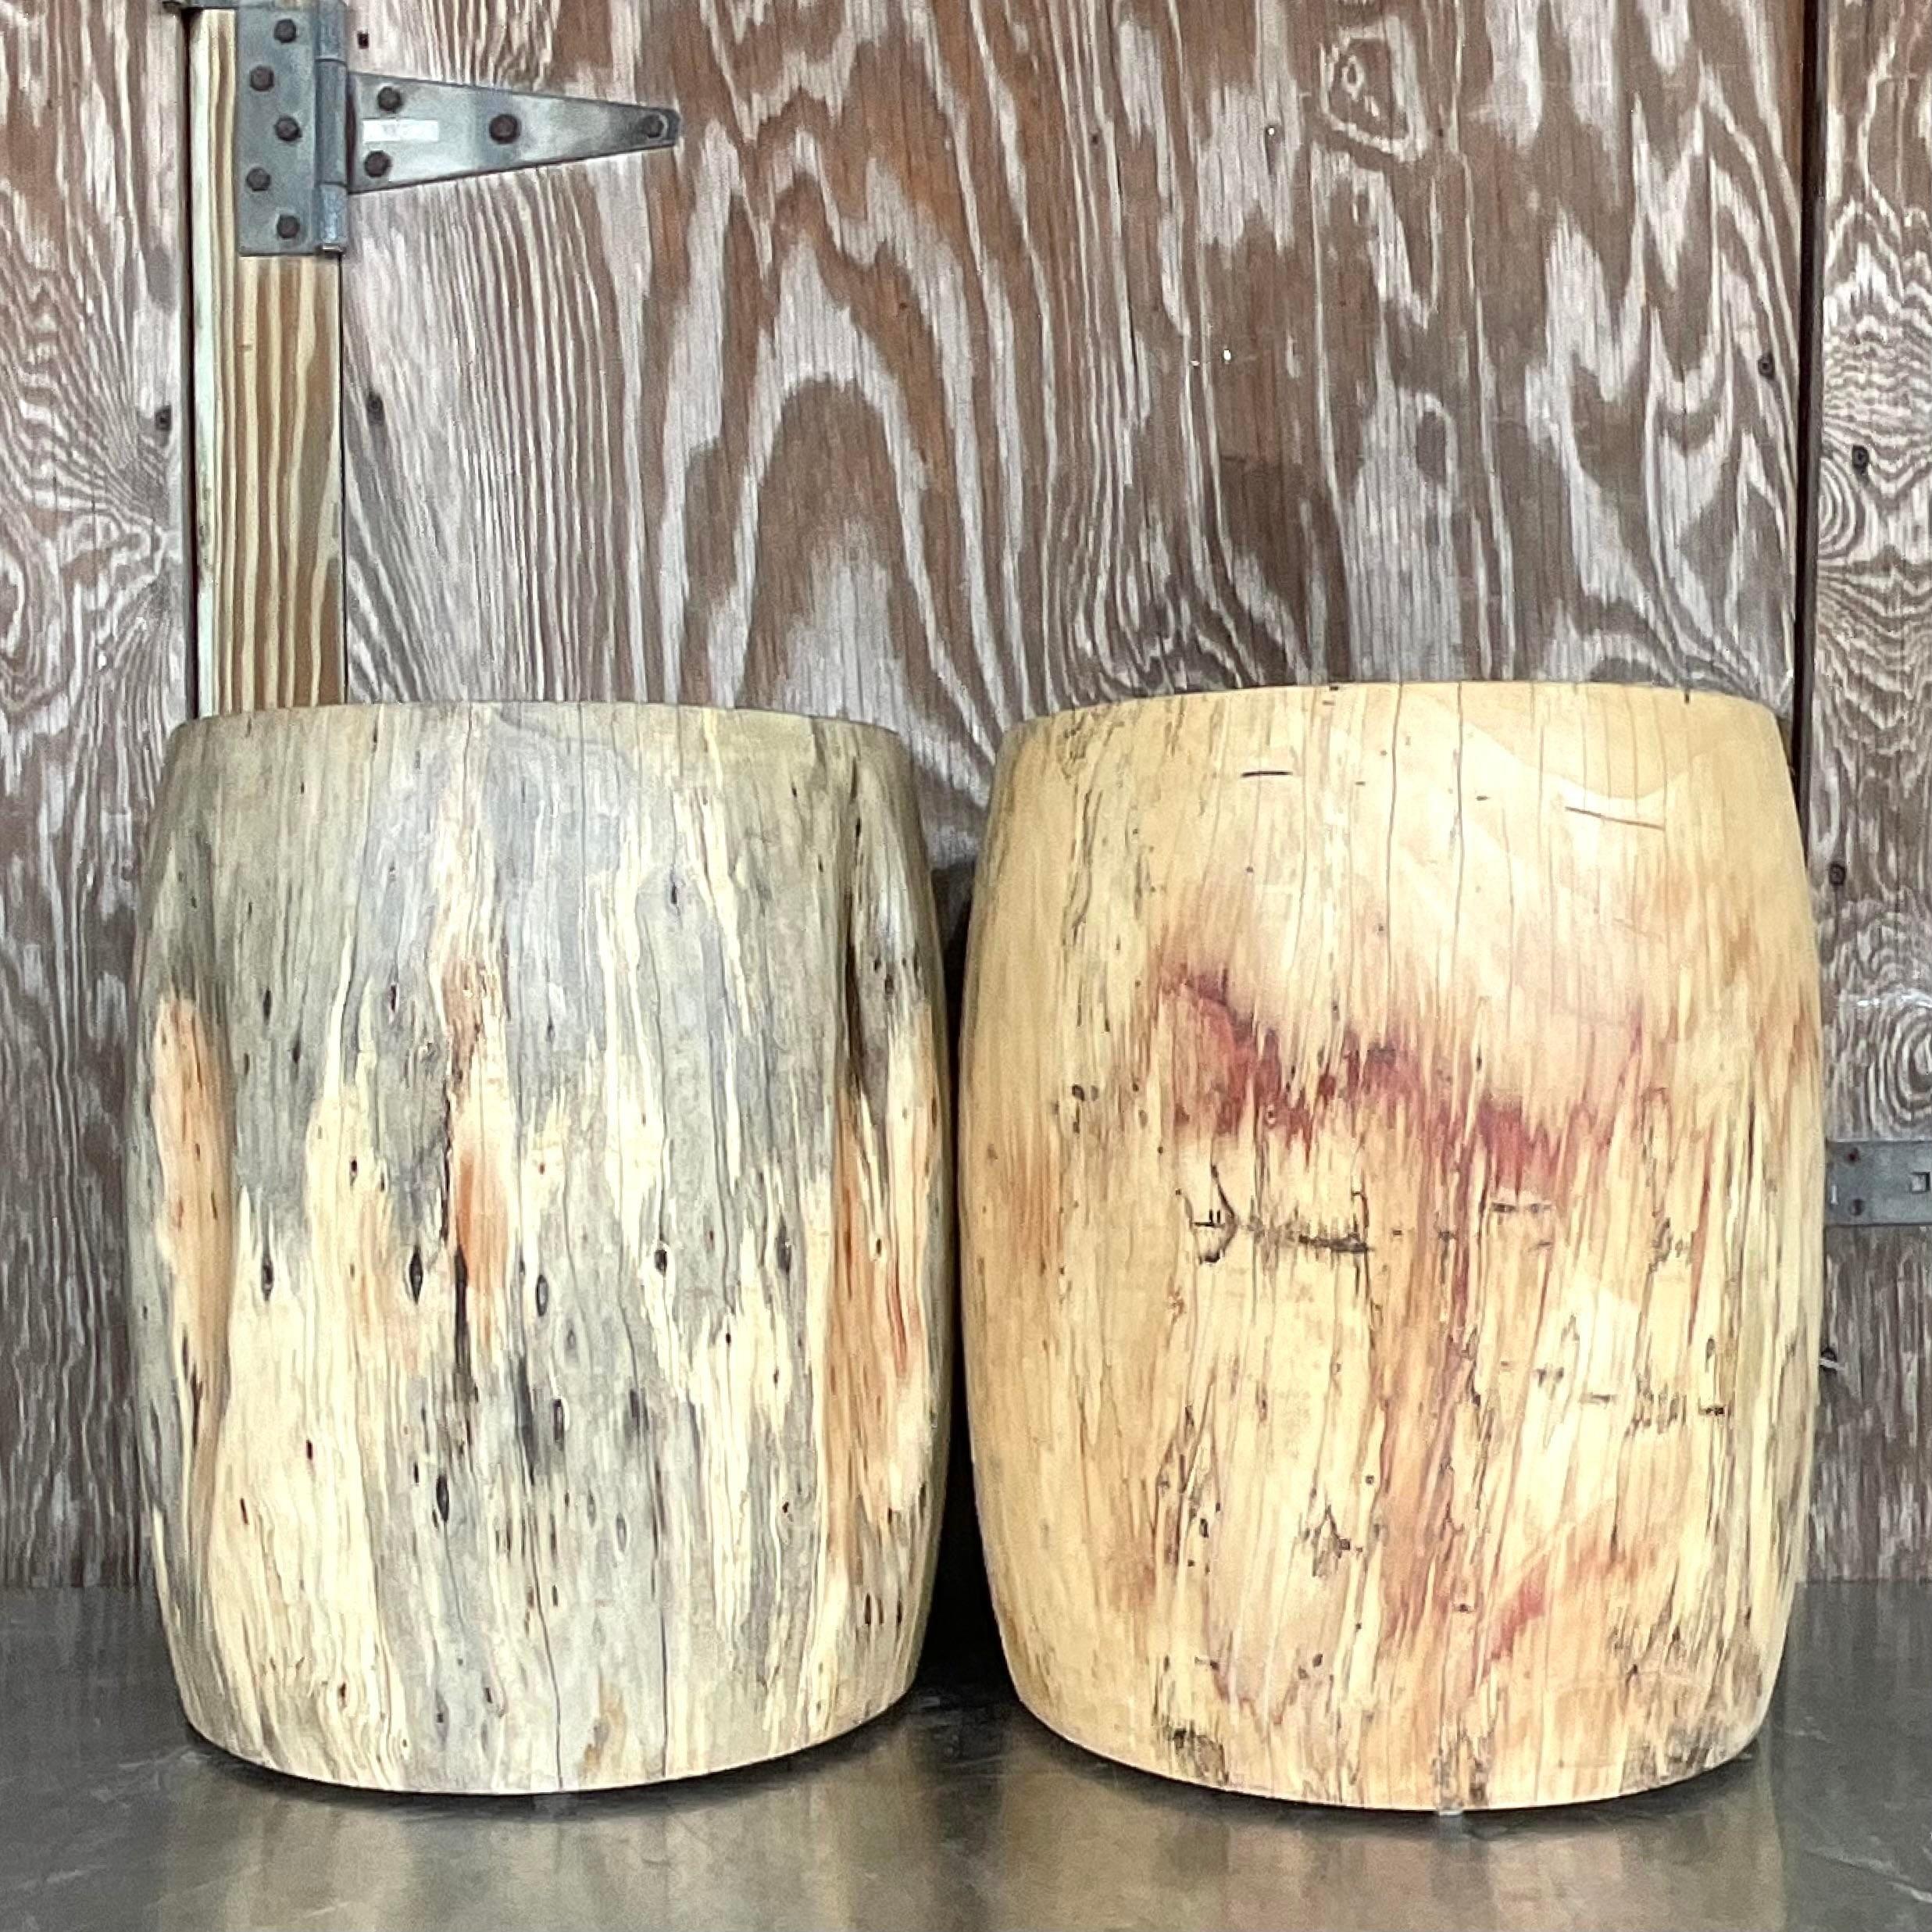 Organic Modern Late 20th Century Vintage Boho Tree Trunk Low Stools - a Pair For Sale